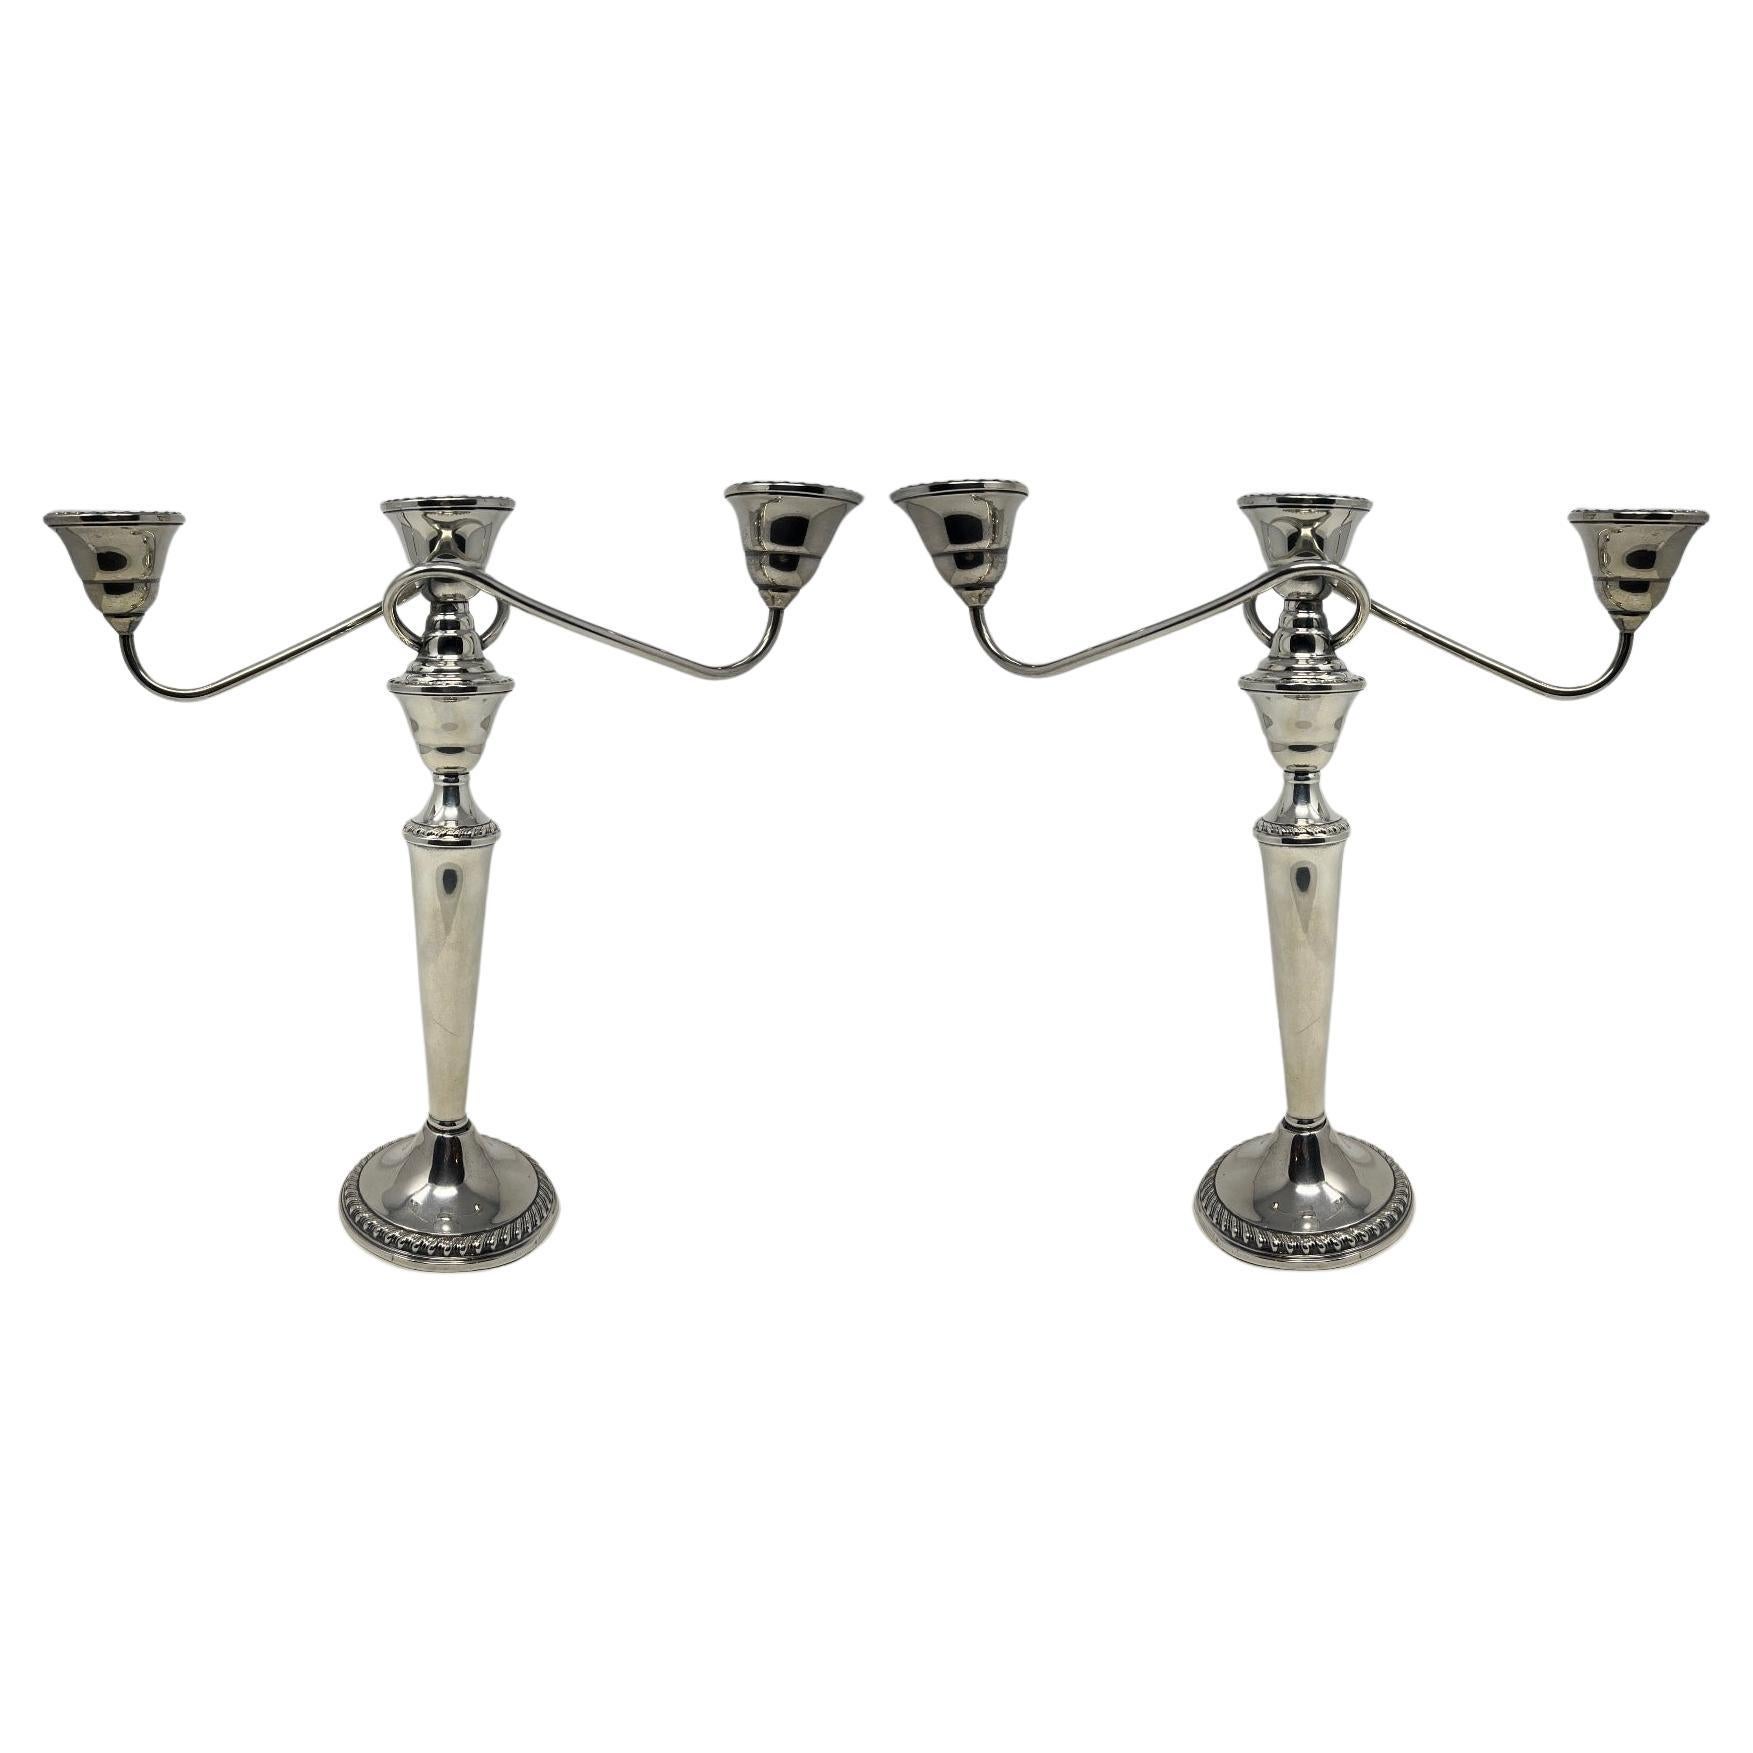 Pair of Antique American Sterling Silver Candelabra Converted to Candlesticks.